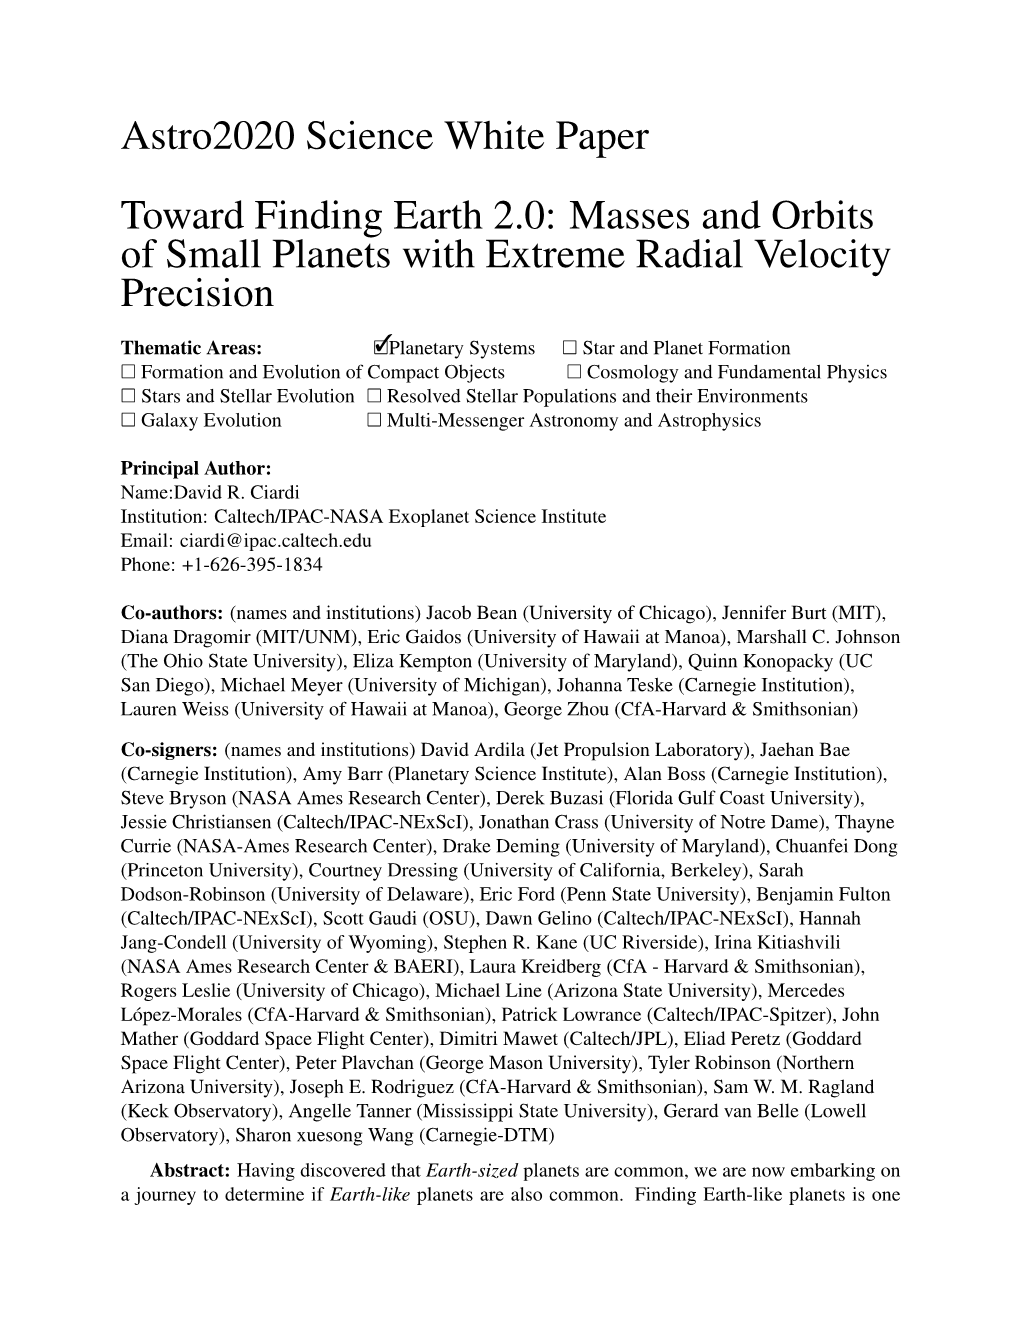 Astro2020 Science White Paper Toward Finding Earth 2.0: Masses and Orbits of Small Planets with Extreme Radial Velocity Precision